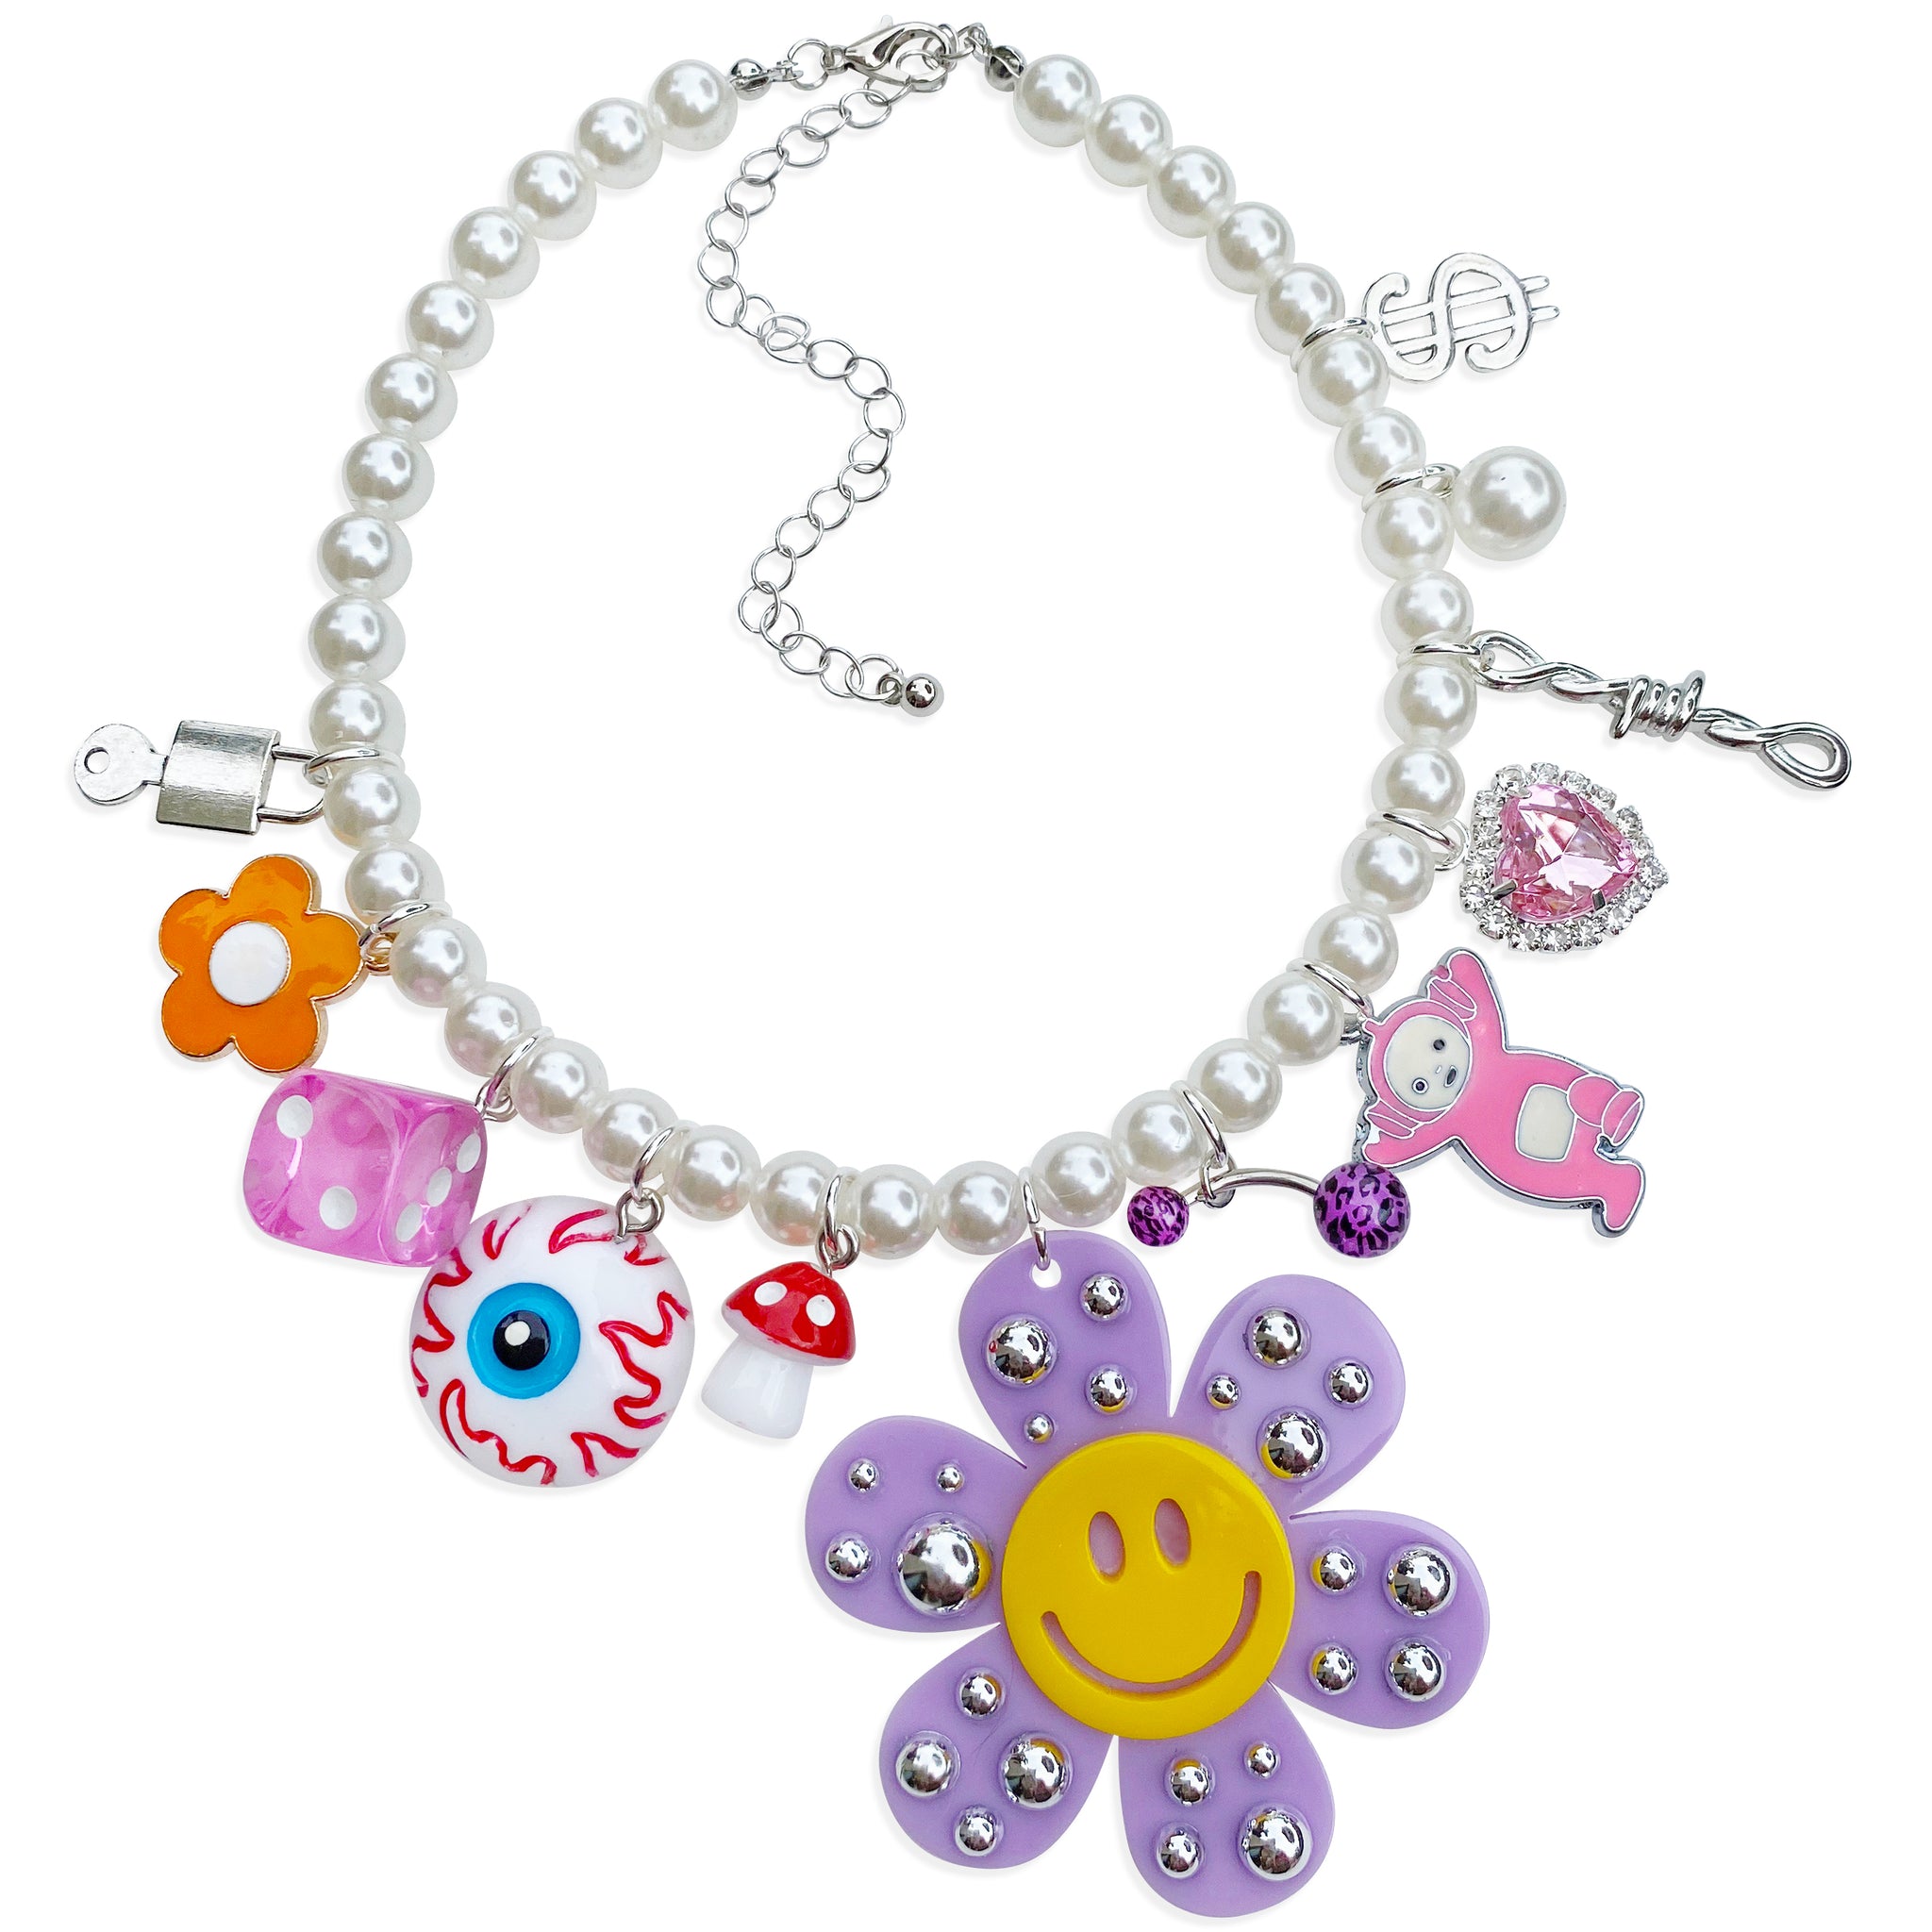 Punk Daisy Bedazzled Pearl Charm Necklace